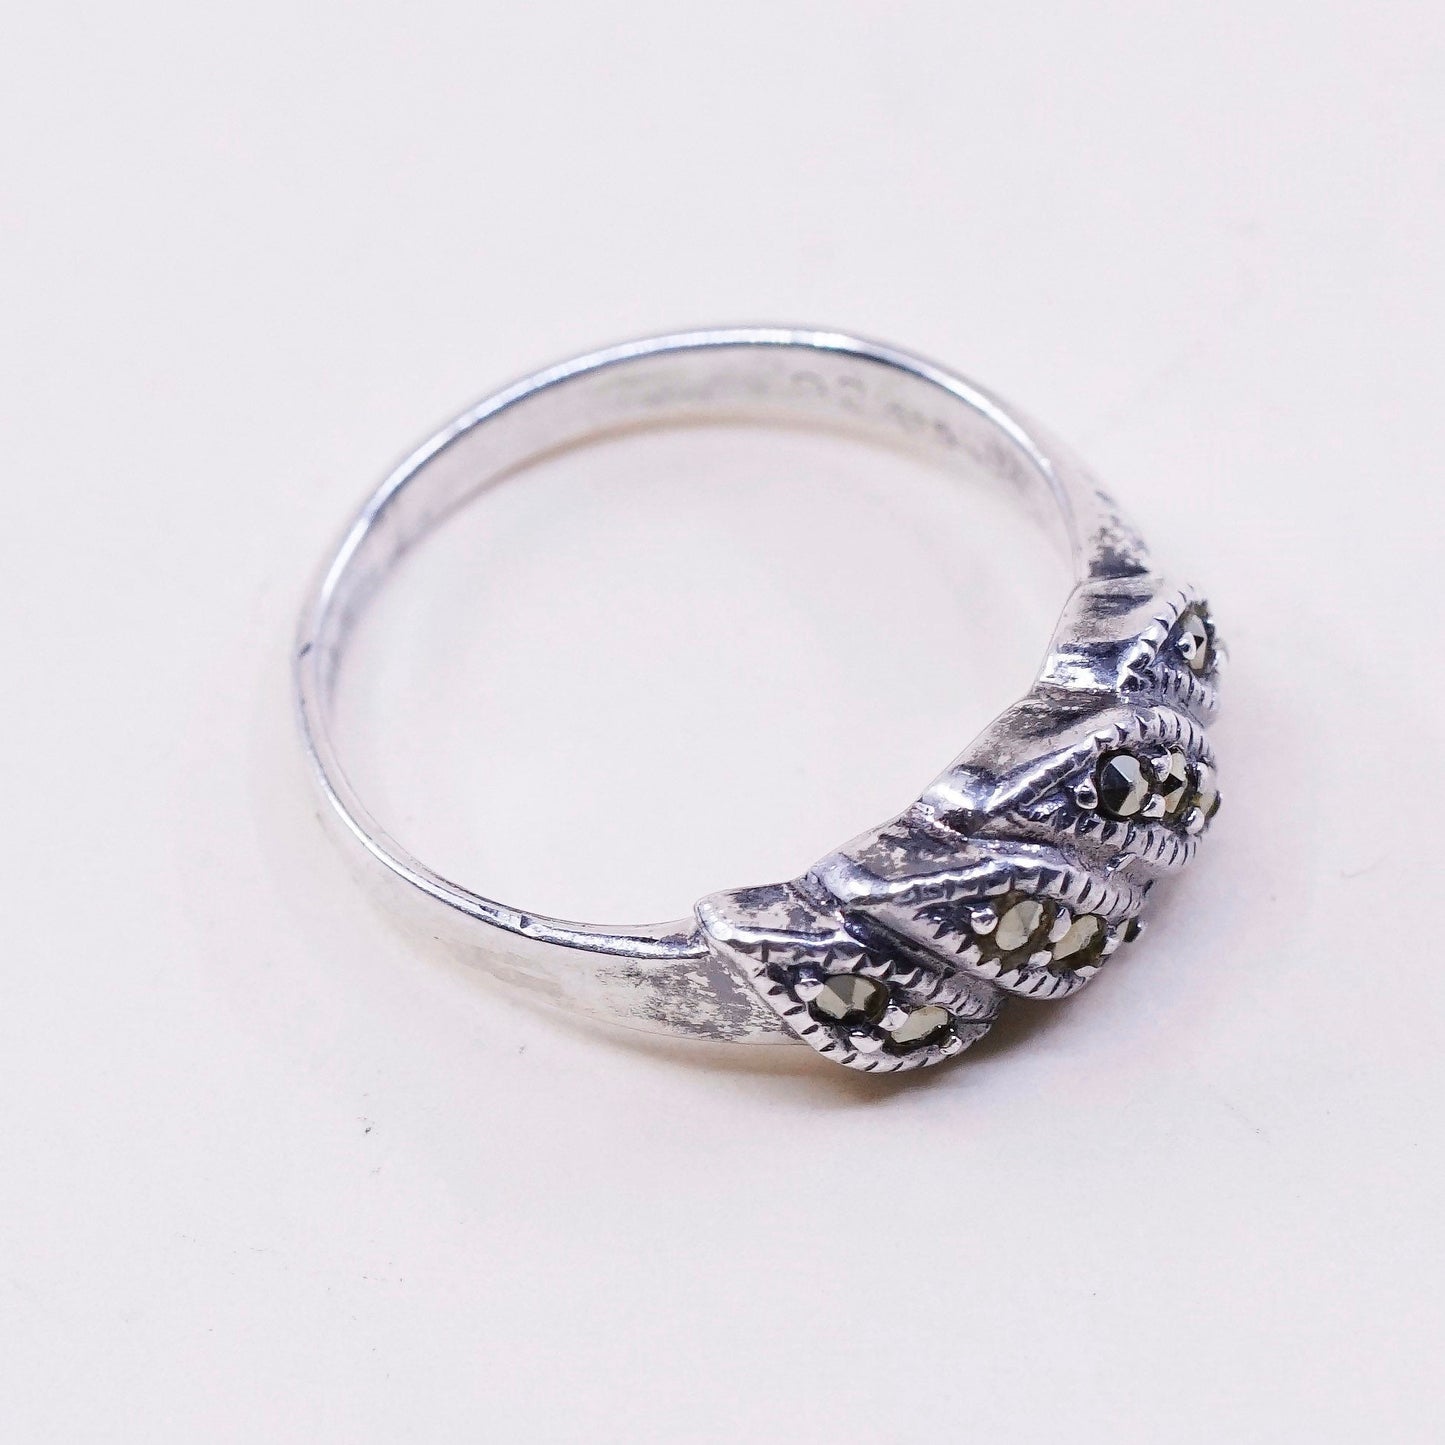 Size 6, Vintage LR Sterling 925 silver handmade ring with marcasite